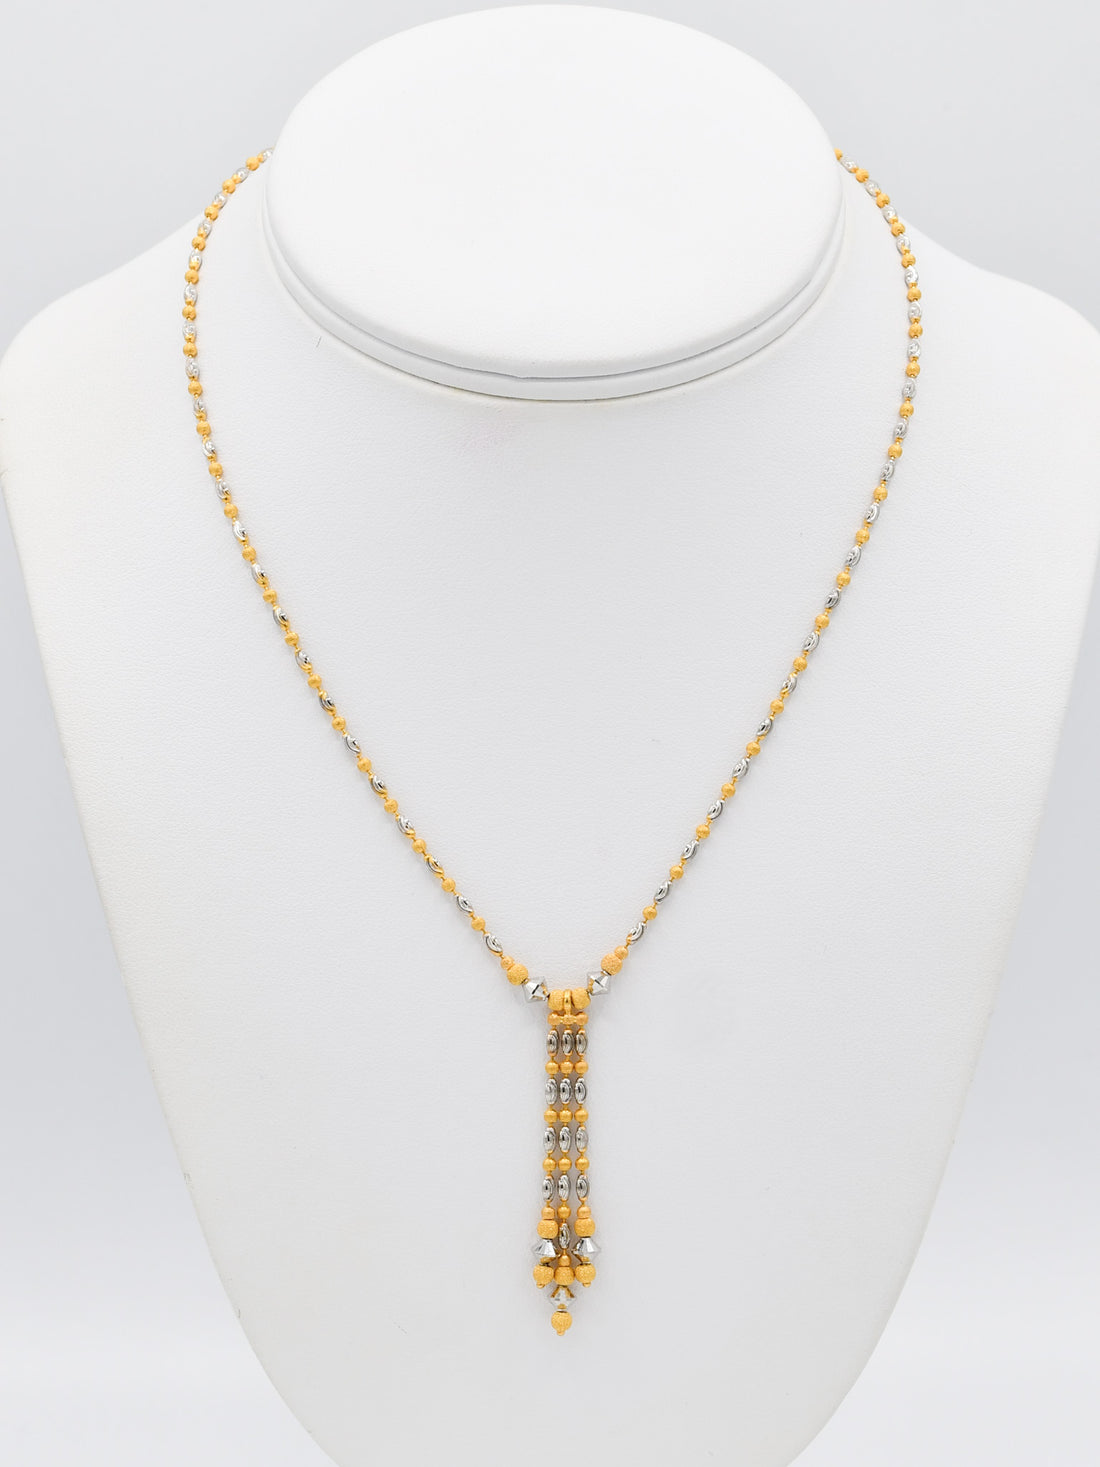 22ct Gold Two Tone Ball Necklace Set